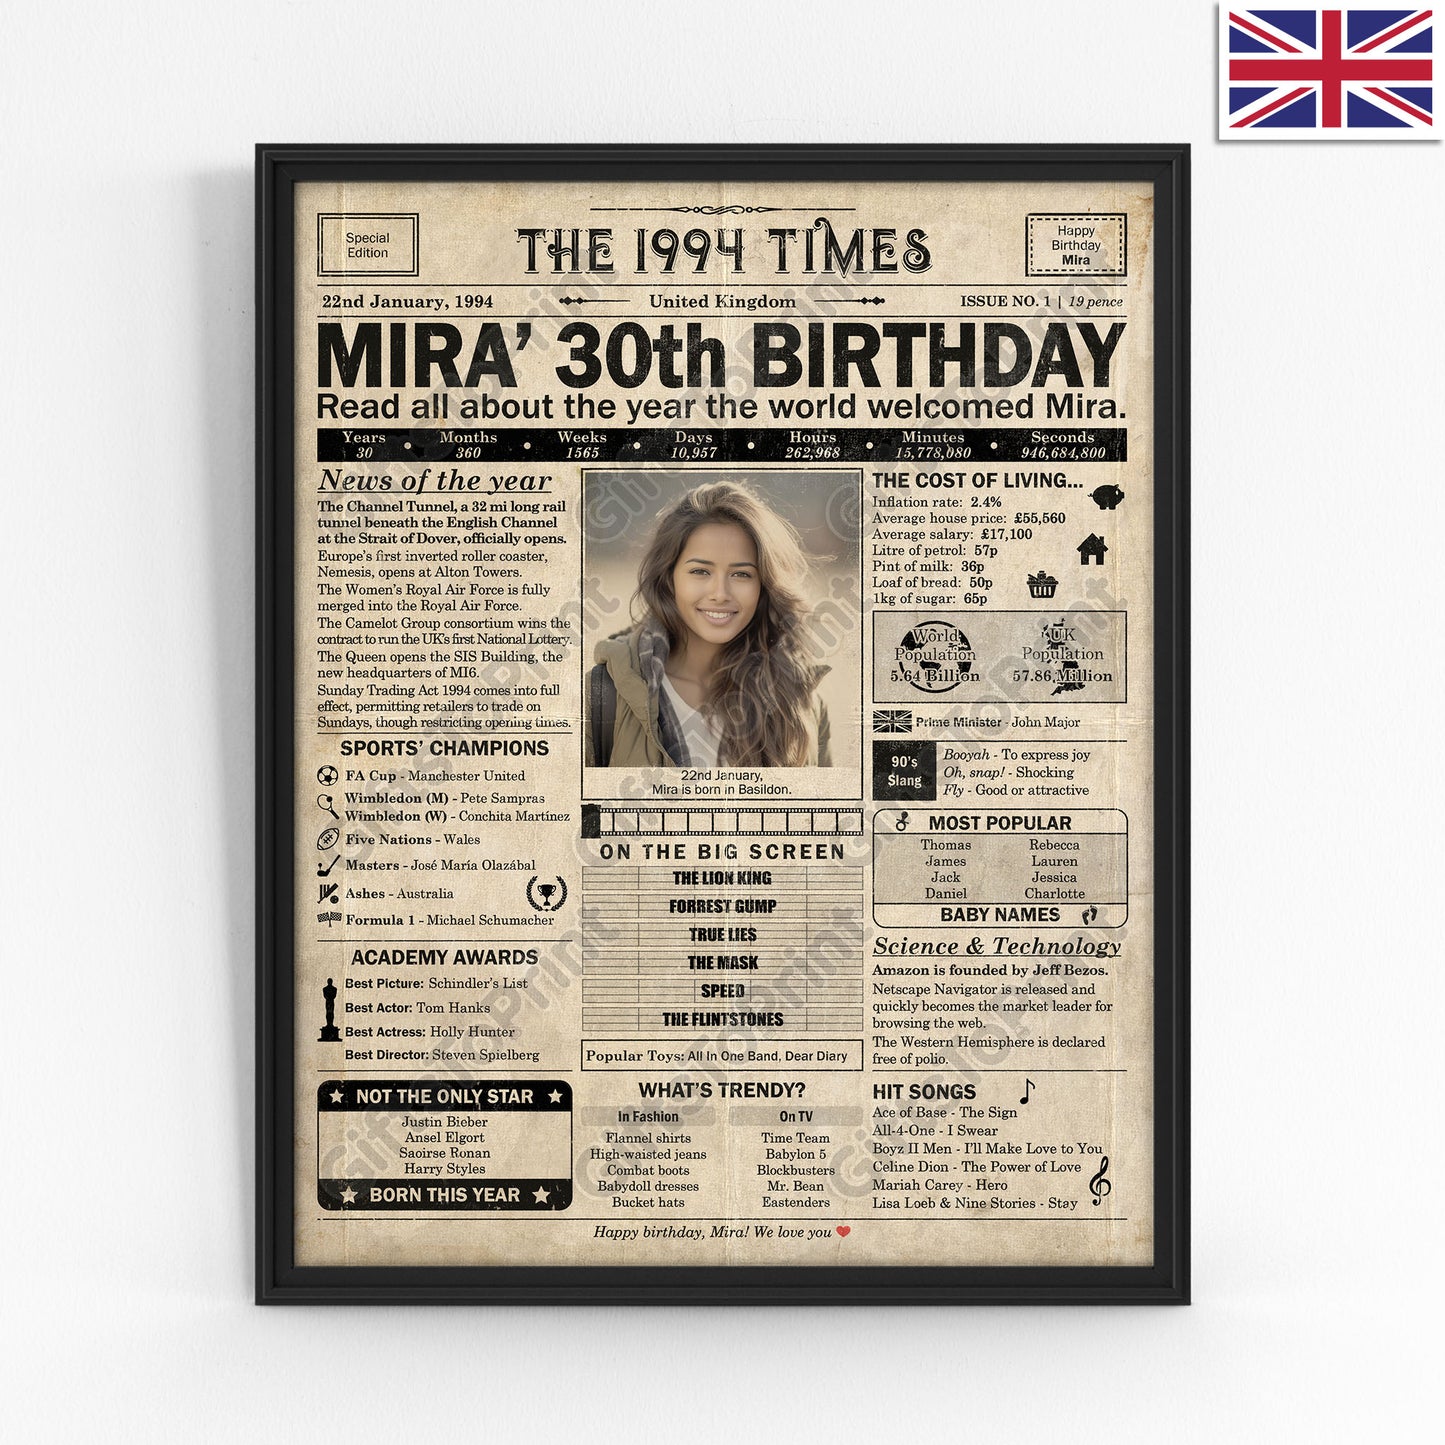 Personalised 30th Birthday Gift: A Printable UK Birthday Poster of 1994